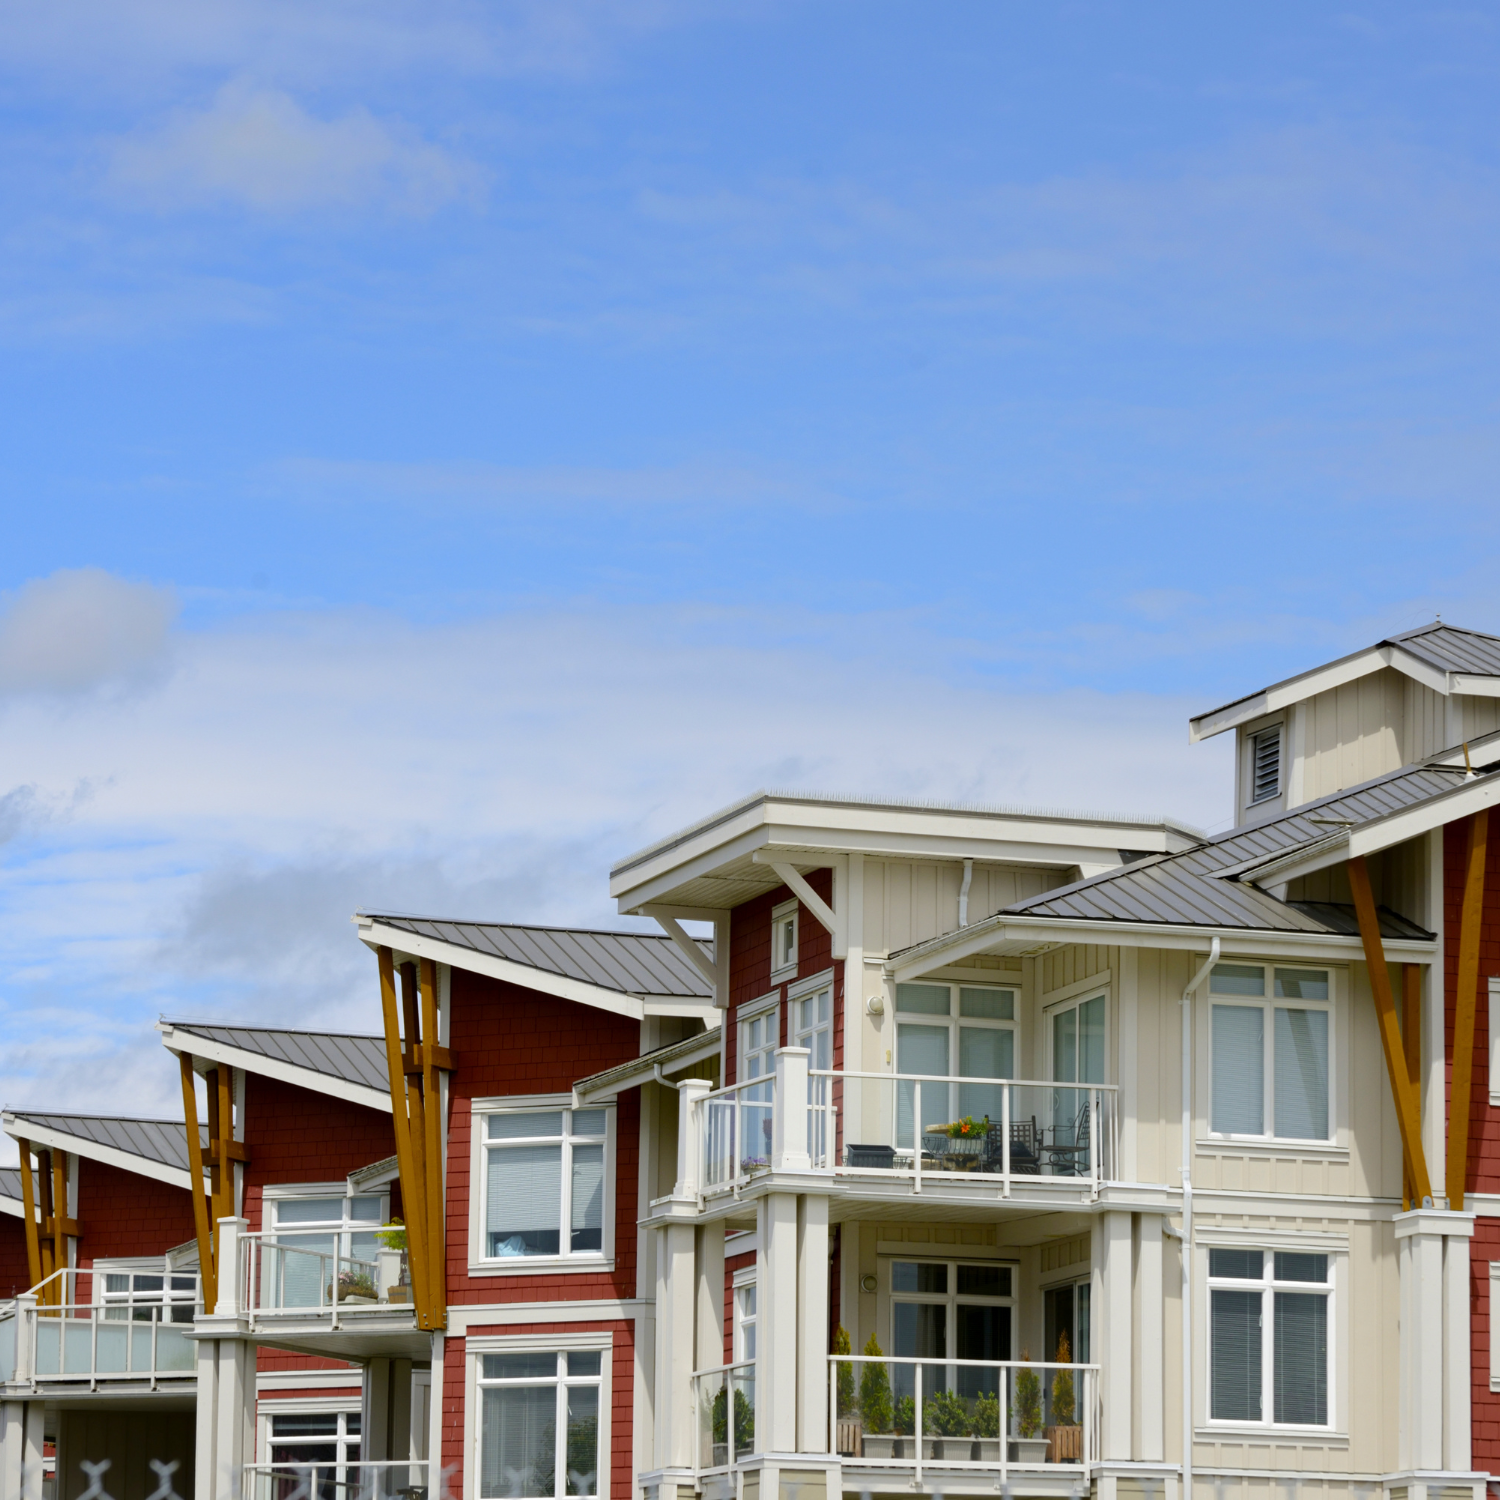 What To Know Before Buying In A Condominium Or Planned Community